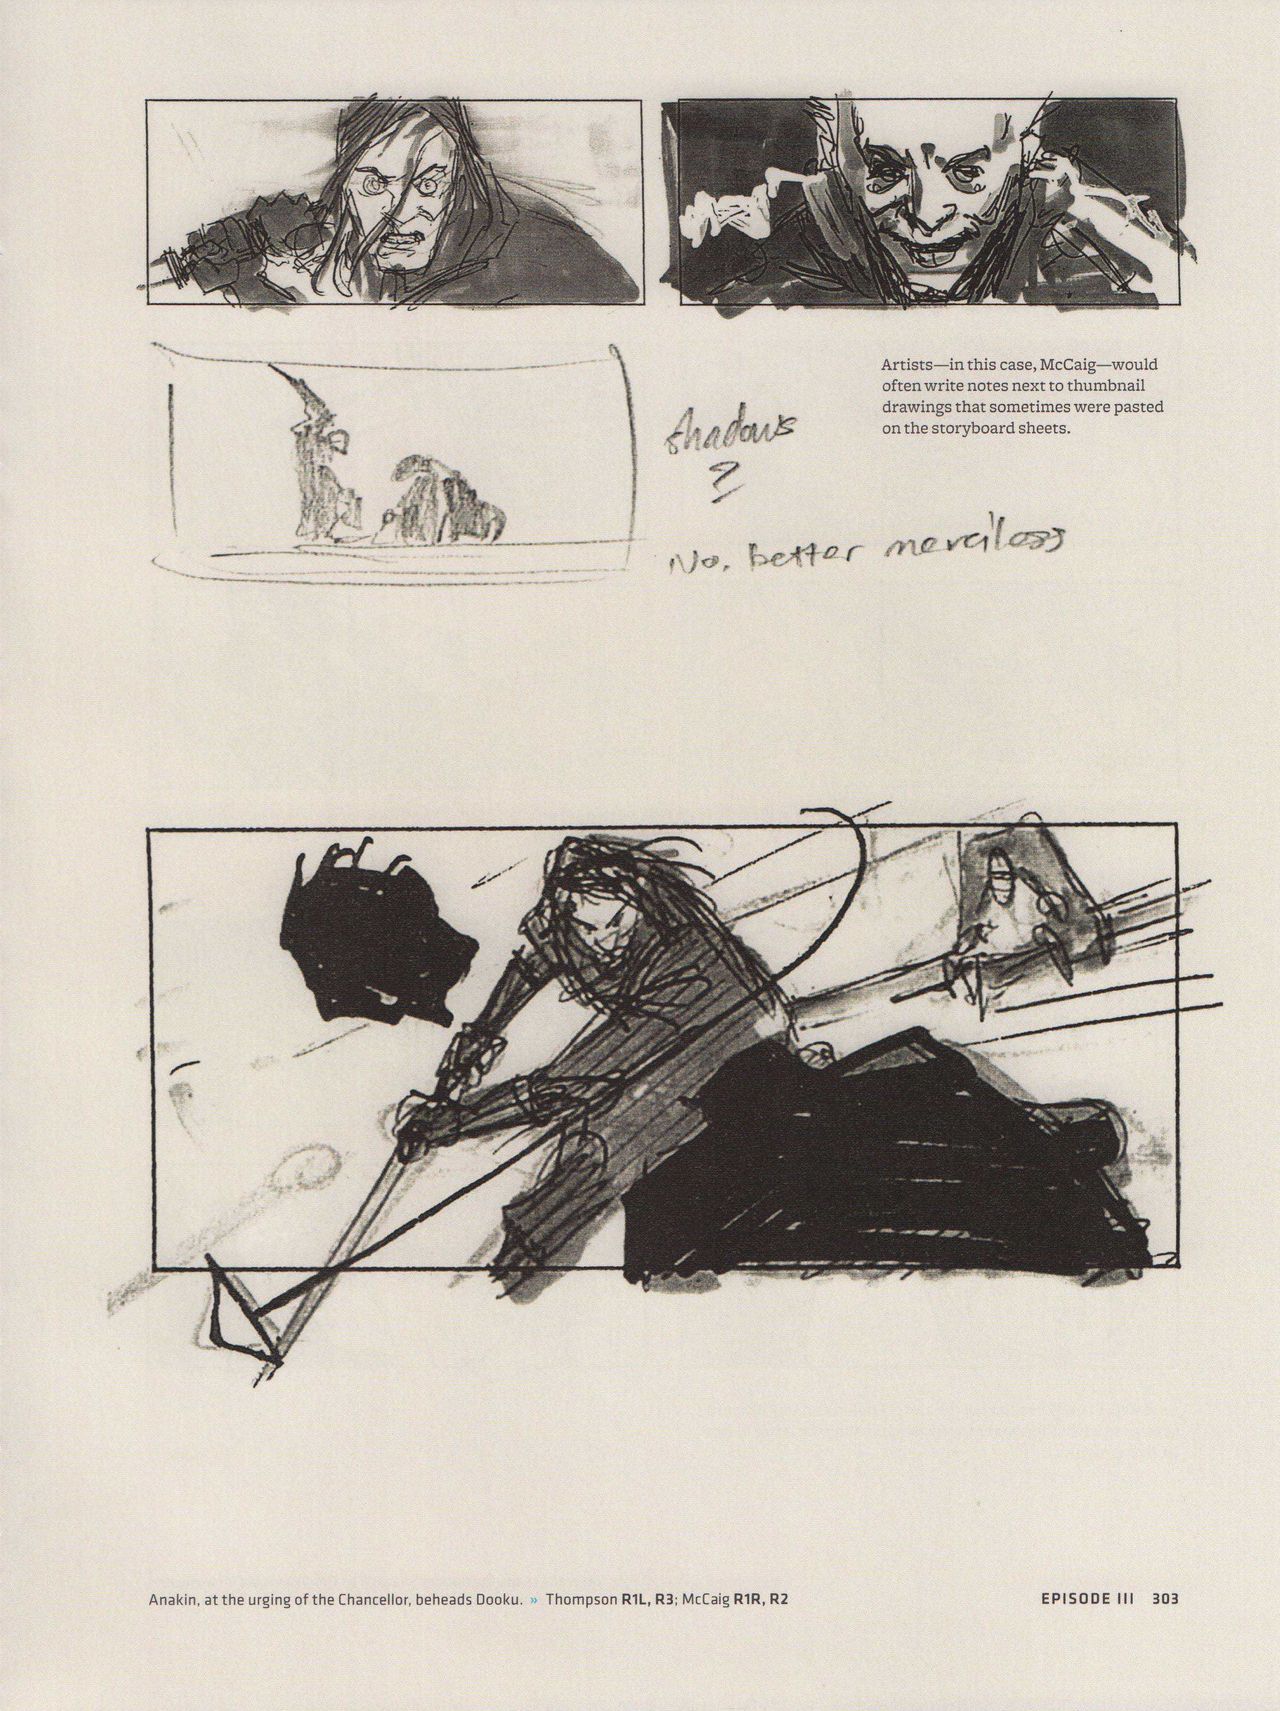 Star Wars Storyboards - The Prequel Trilogy 307